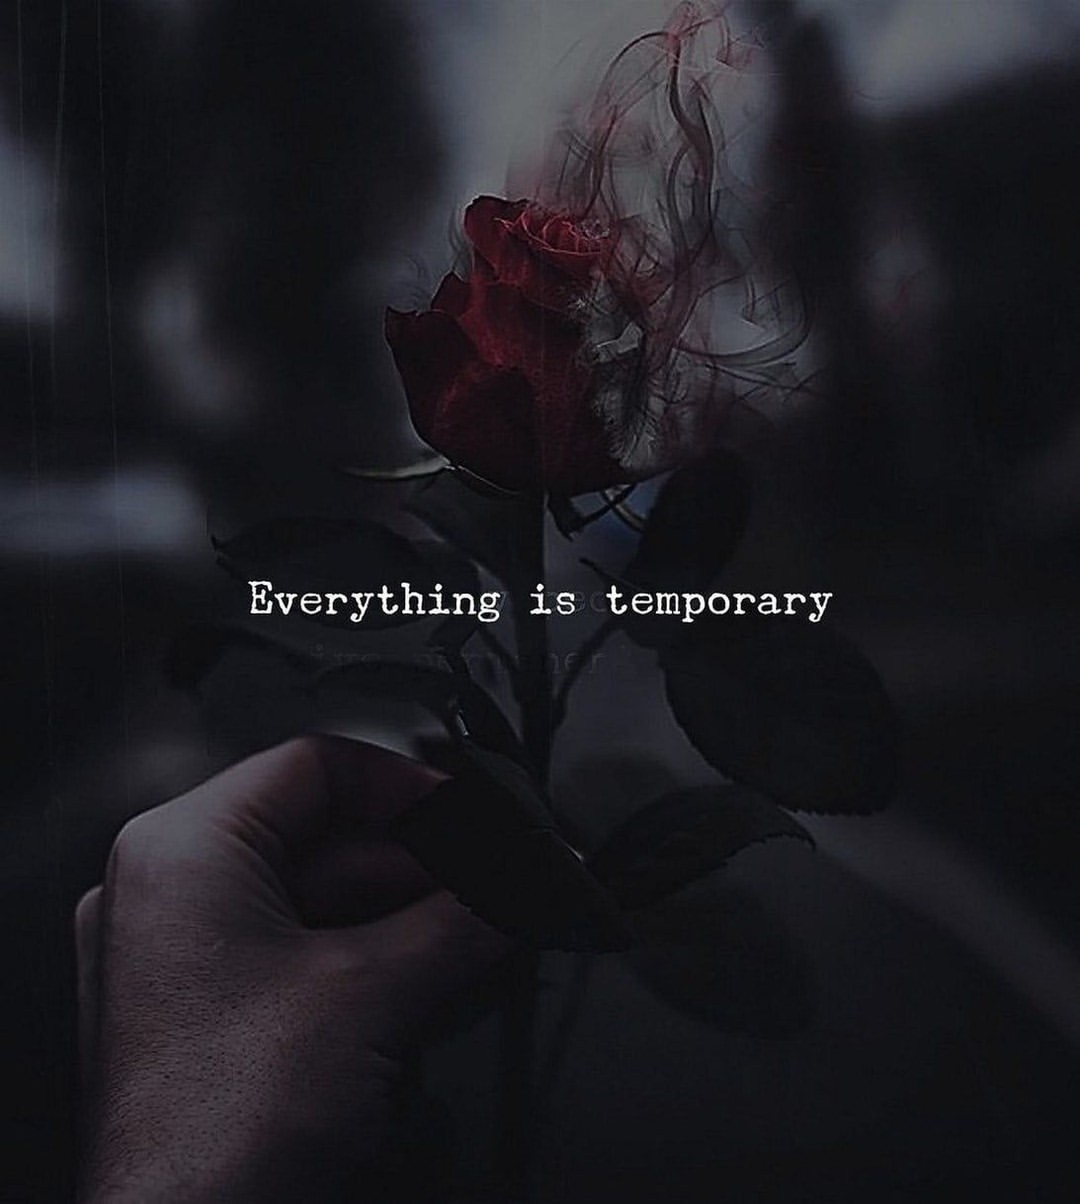 Everything is temporary.